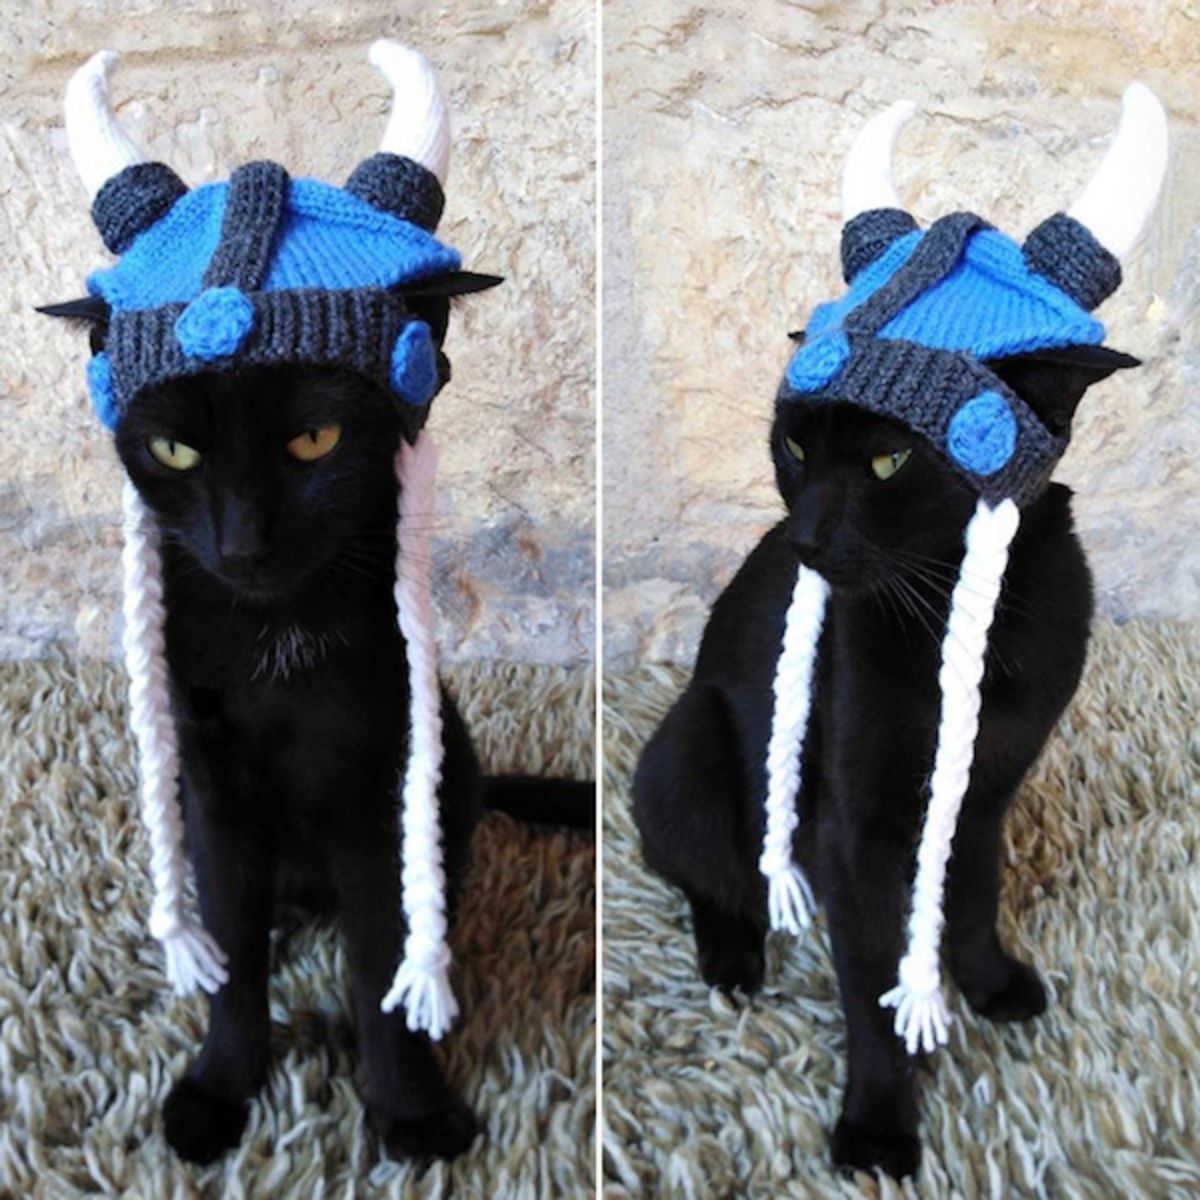 2 photos of a black cat wearing blue and black hat with 2 white horns